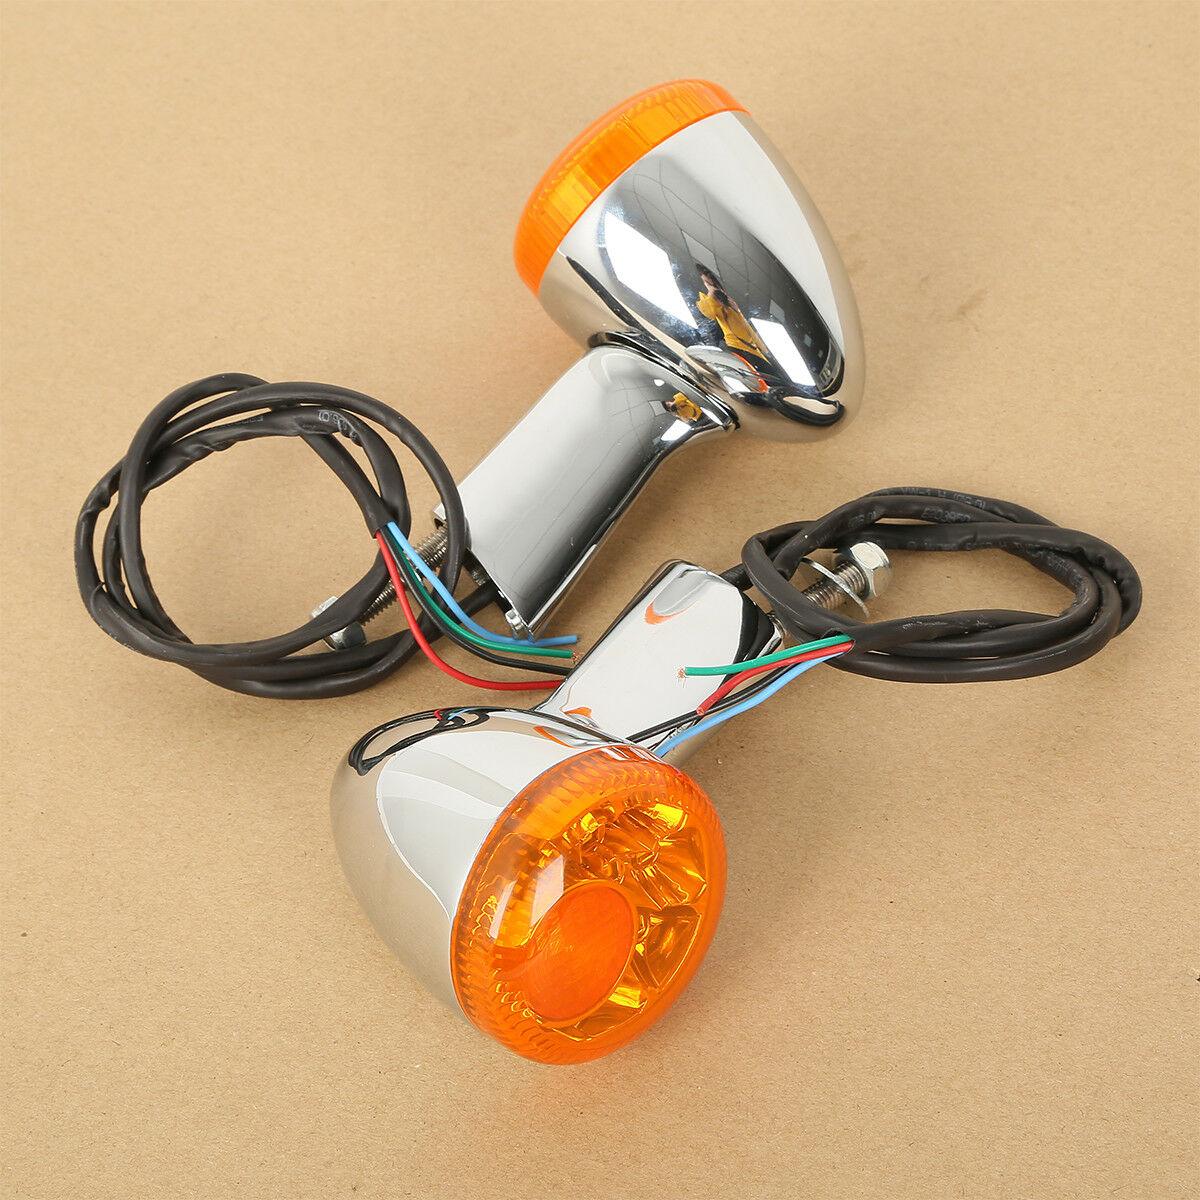 Orange Rear Turn Signals LED Amber Light For Harley Sportster 883 XL1200 1992-22 - Moto Life Products